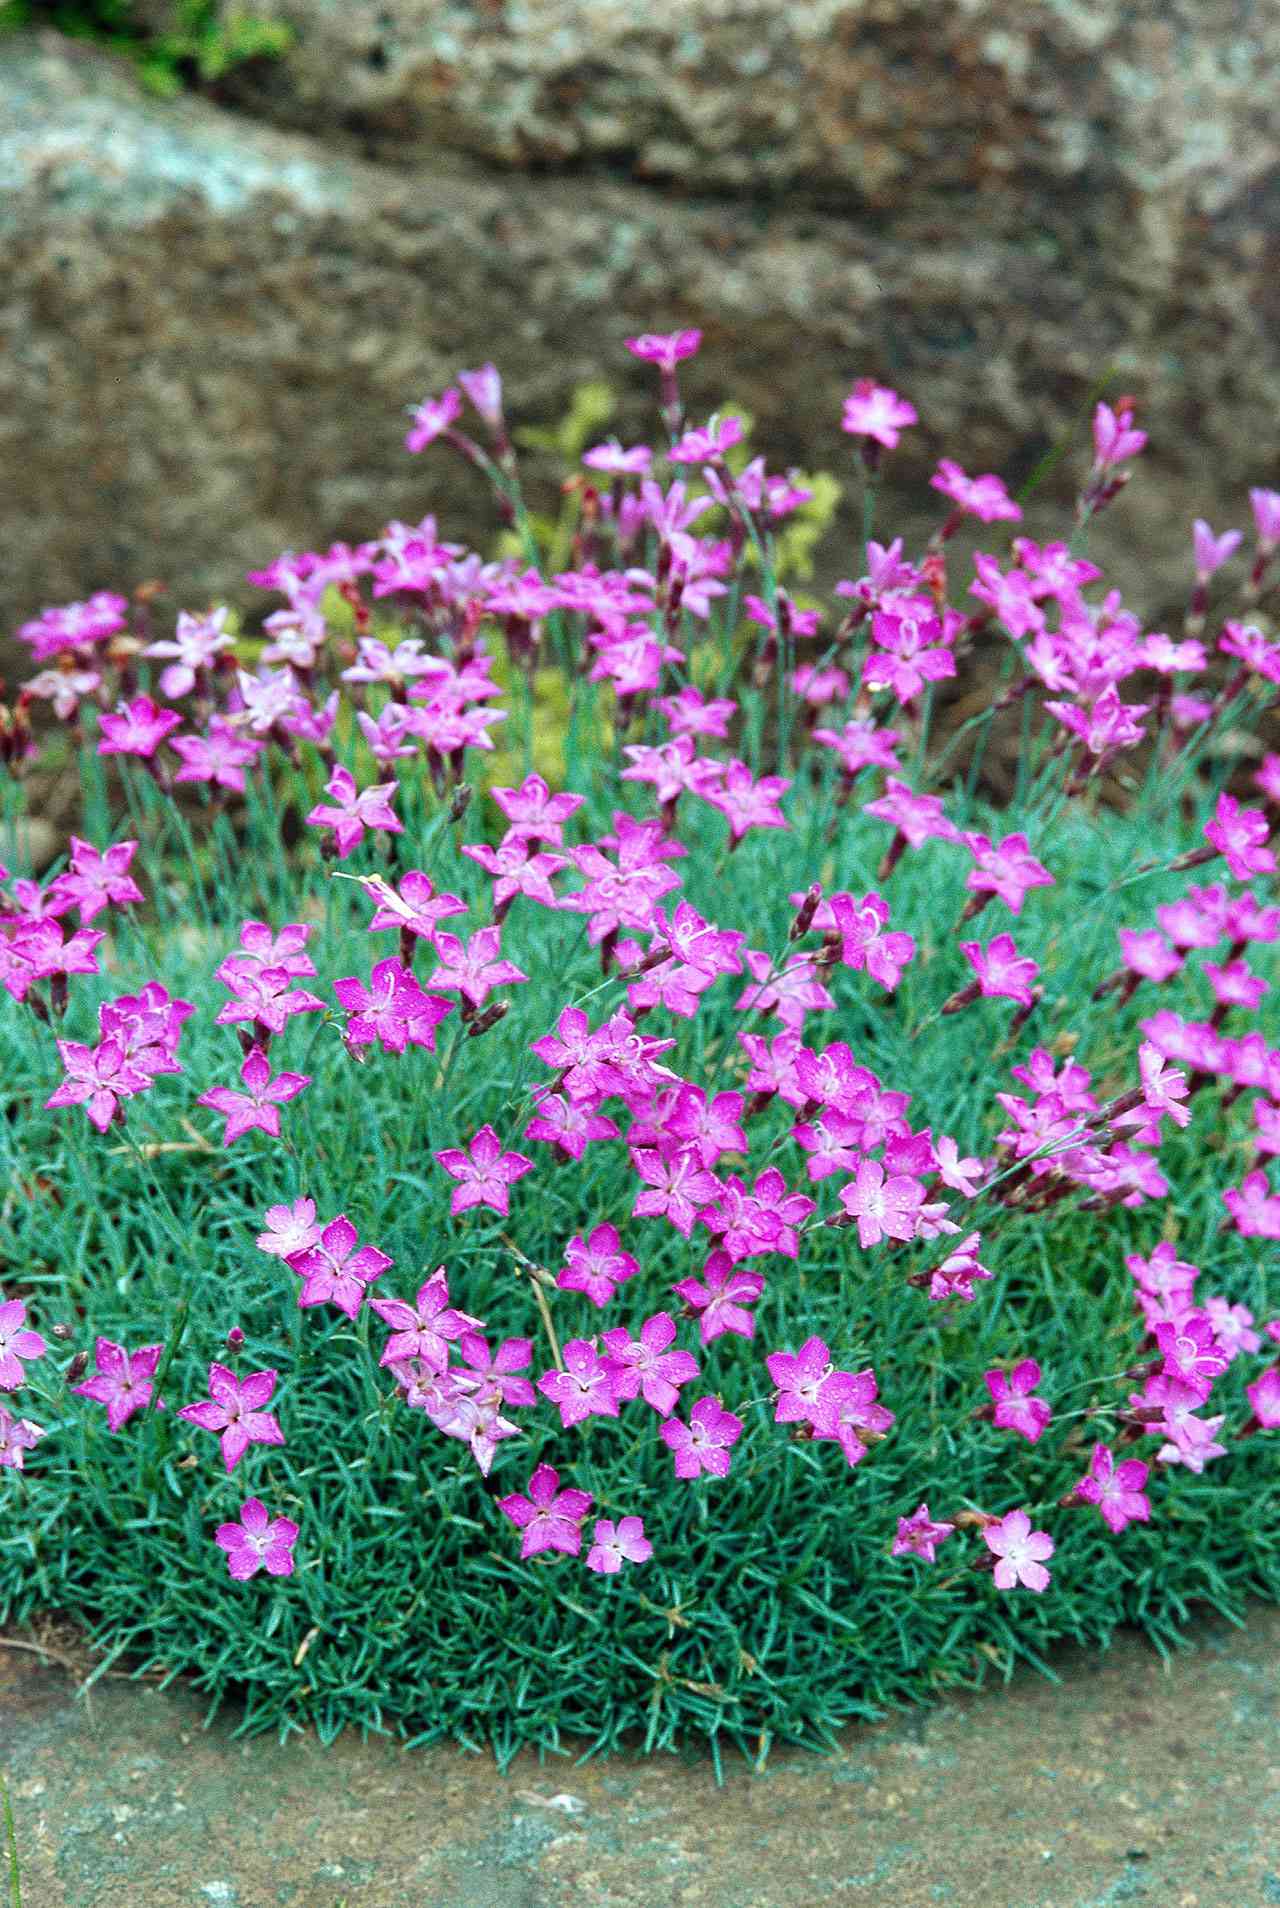 Drought Tolerant Groundcovers Better, Pink Ground Cover Plants Australia